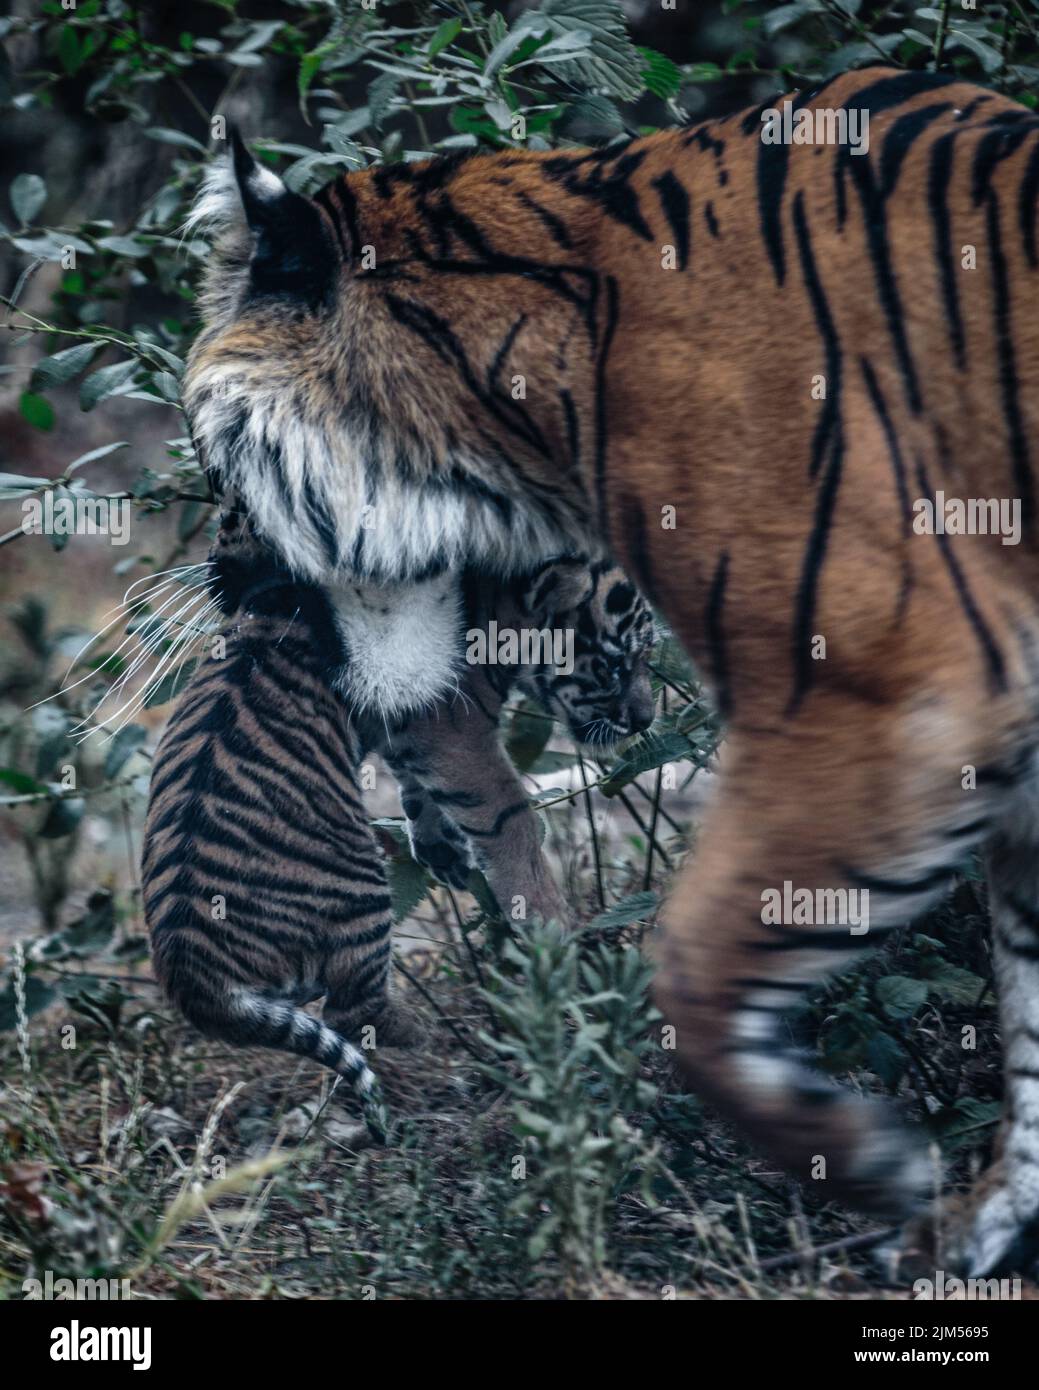 A tigress carries her young cub at the London Zoo. Stock Photo